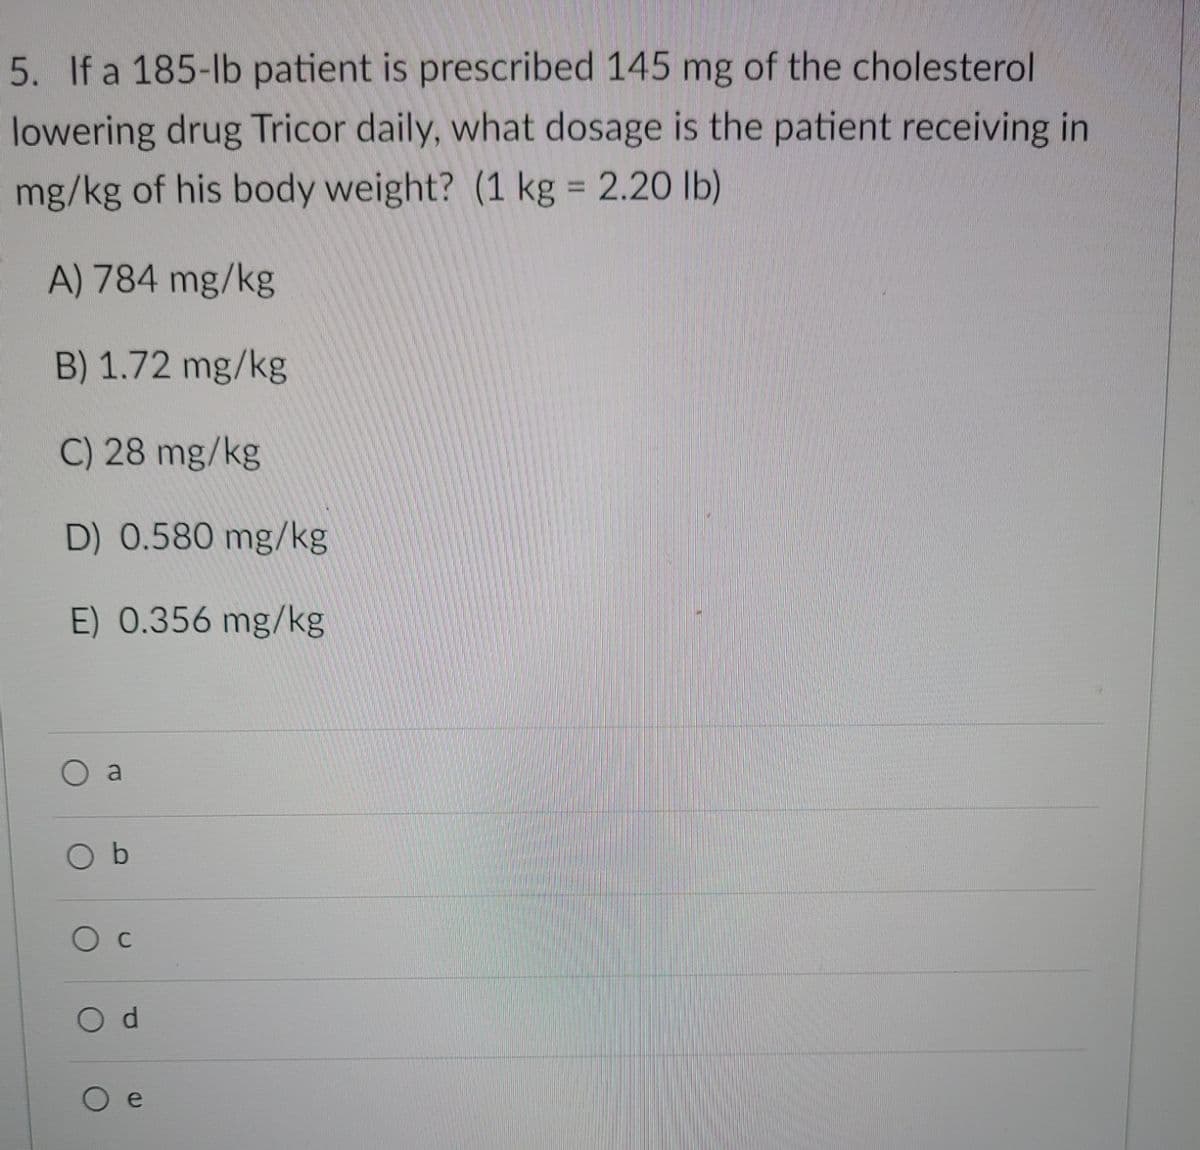 5. If a 185-lb patient is prescribed 145 mg of the cholesterol
lowering drug Tricor daily, what dosage is the patient receiving in
mg/kg of his body weight? (1 kg = 2.20 lb)
%3D
A) 784 mg/kg
B) 1.72 mg/kg
C) 28 mg/kg
D) 0.580 mg/kg
E) 0.356 mg/kg
a
O d
e
C.
